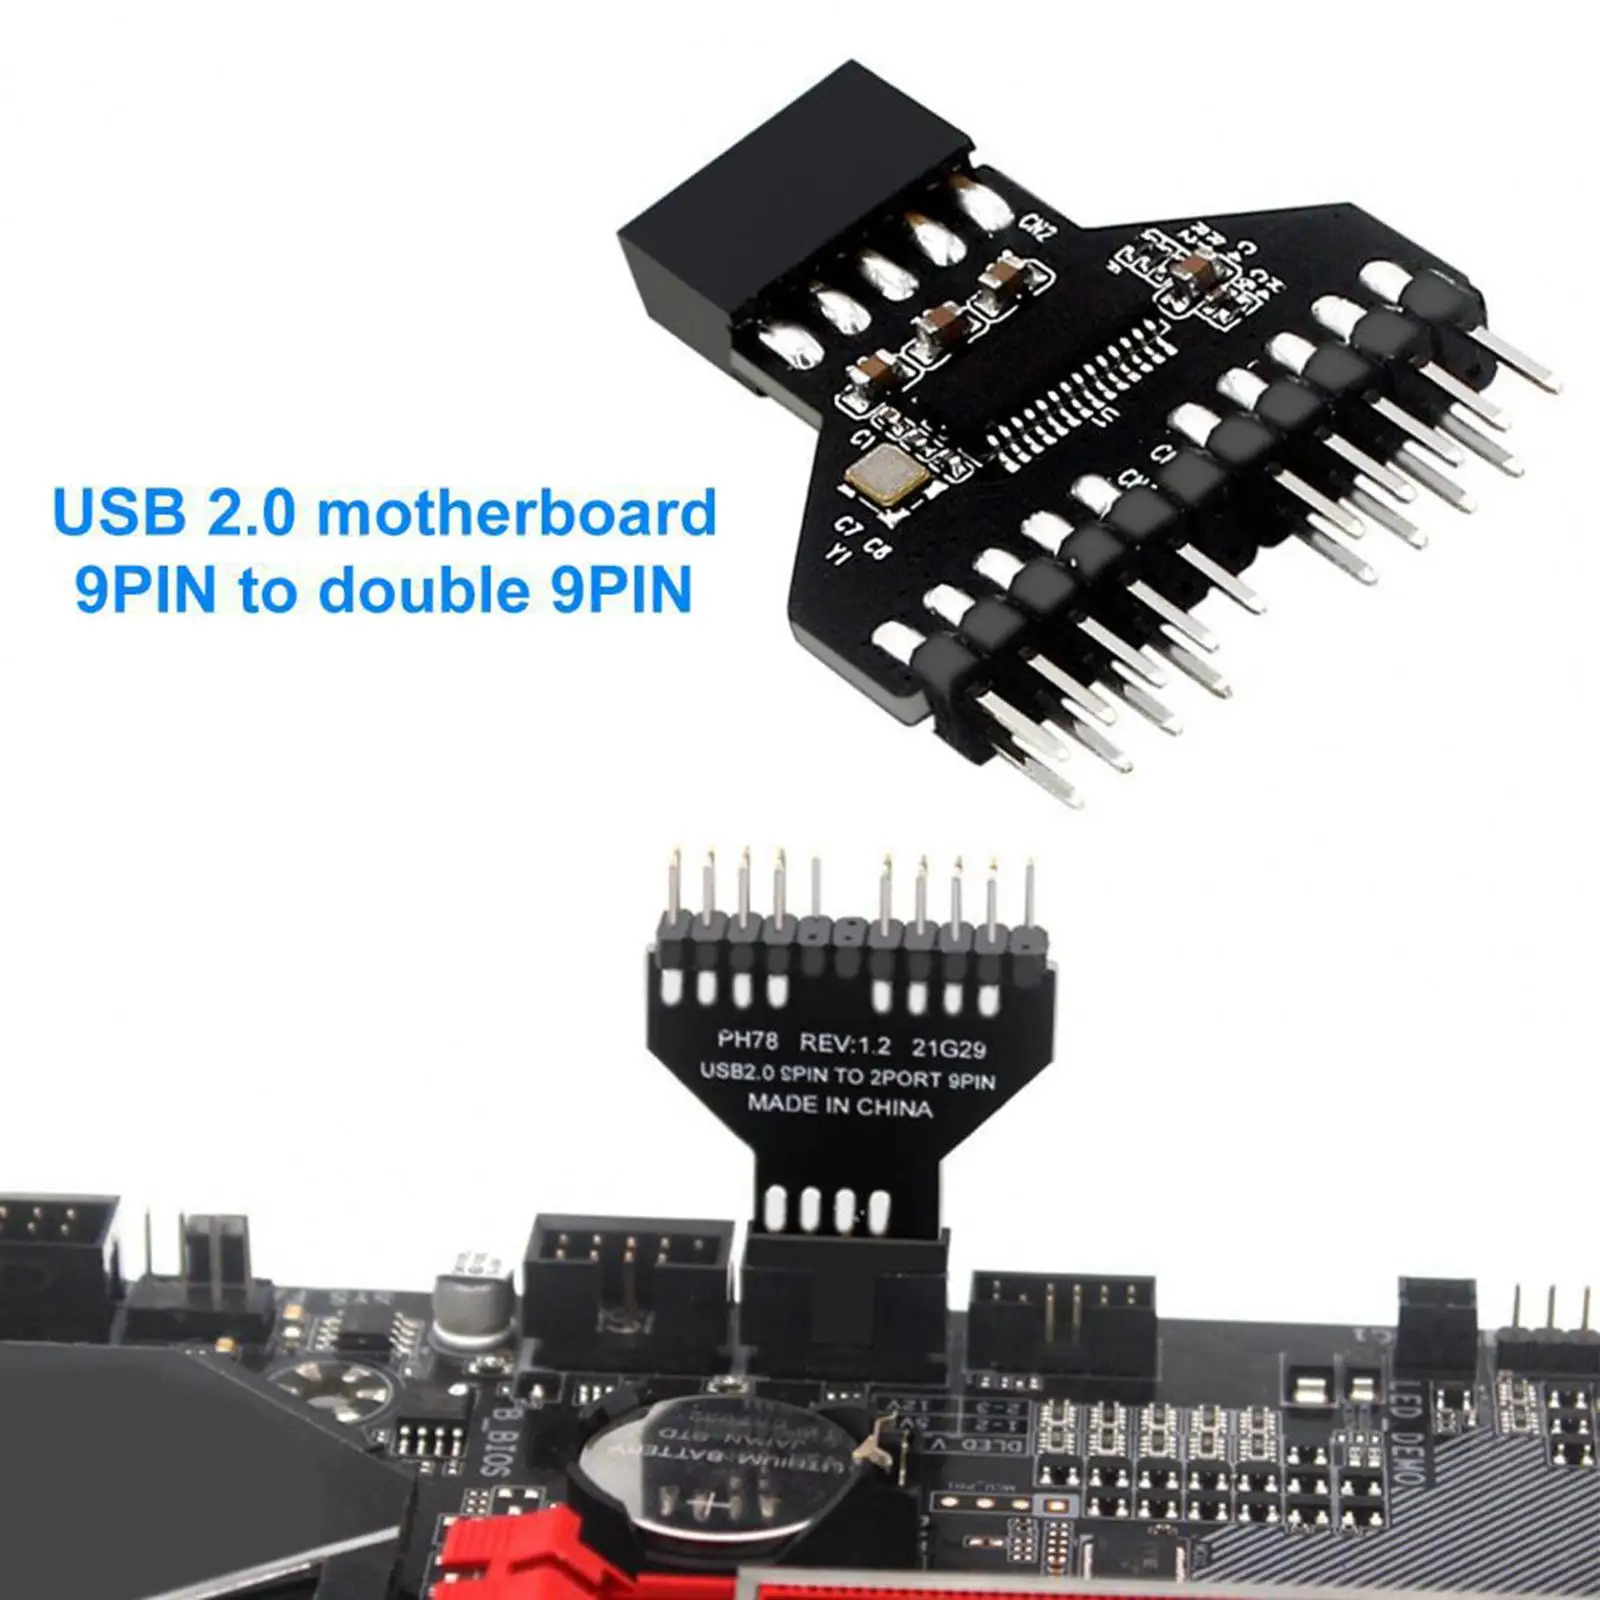 USB2.0 Motherboard 9Pin to Dual 9Pin Male Adapter for RGB Lamp Fan 9Pin USB Header Female 1 to 2 Male Extension Splitter